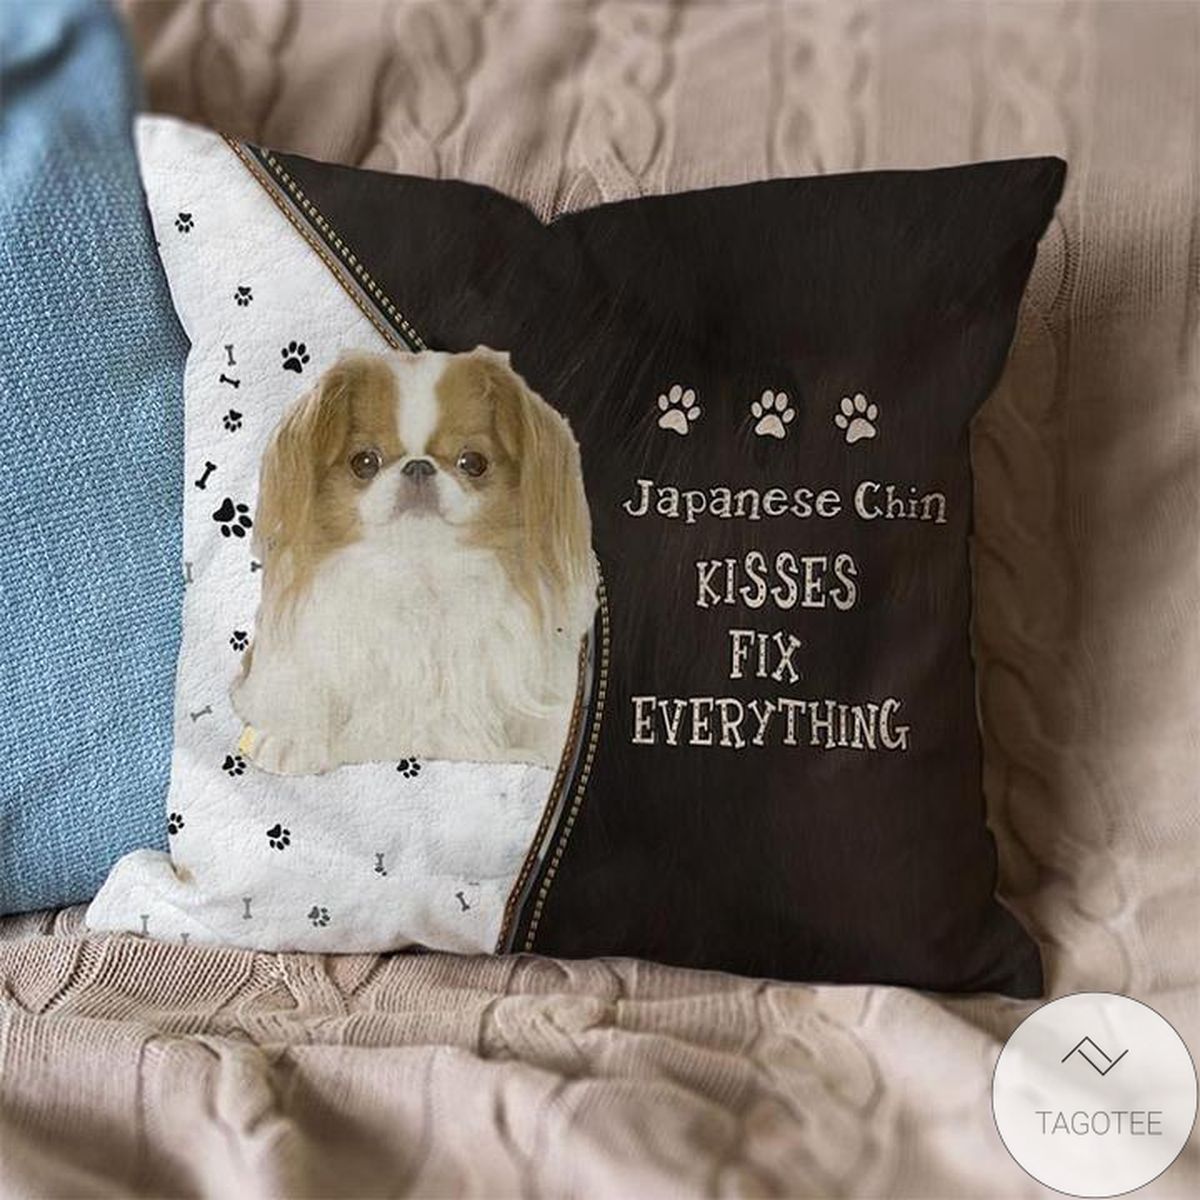 Japanese Chin Kisses Fix Everything Pillowcase